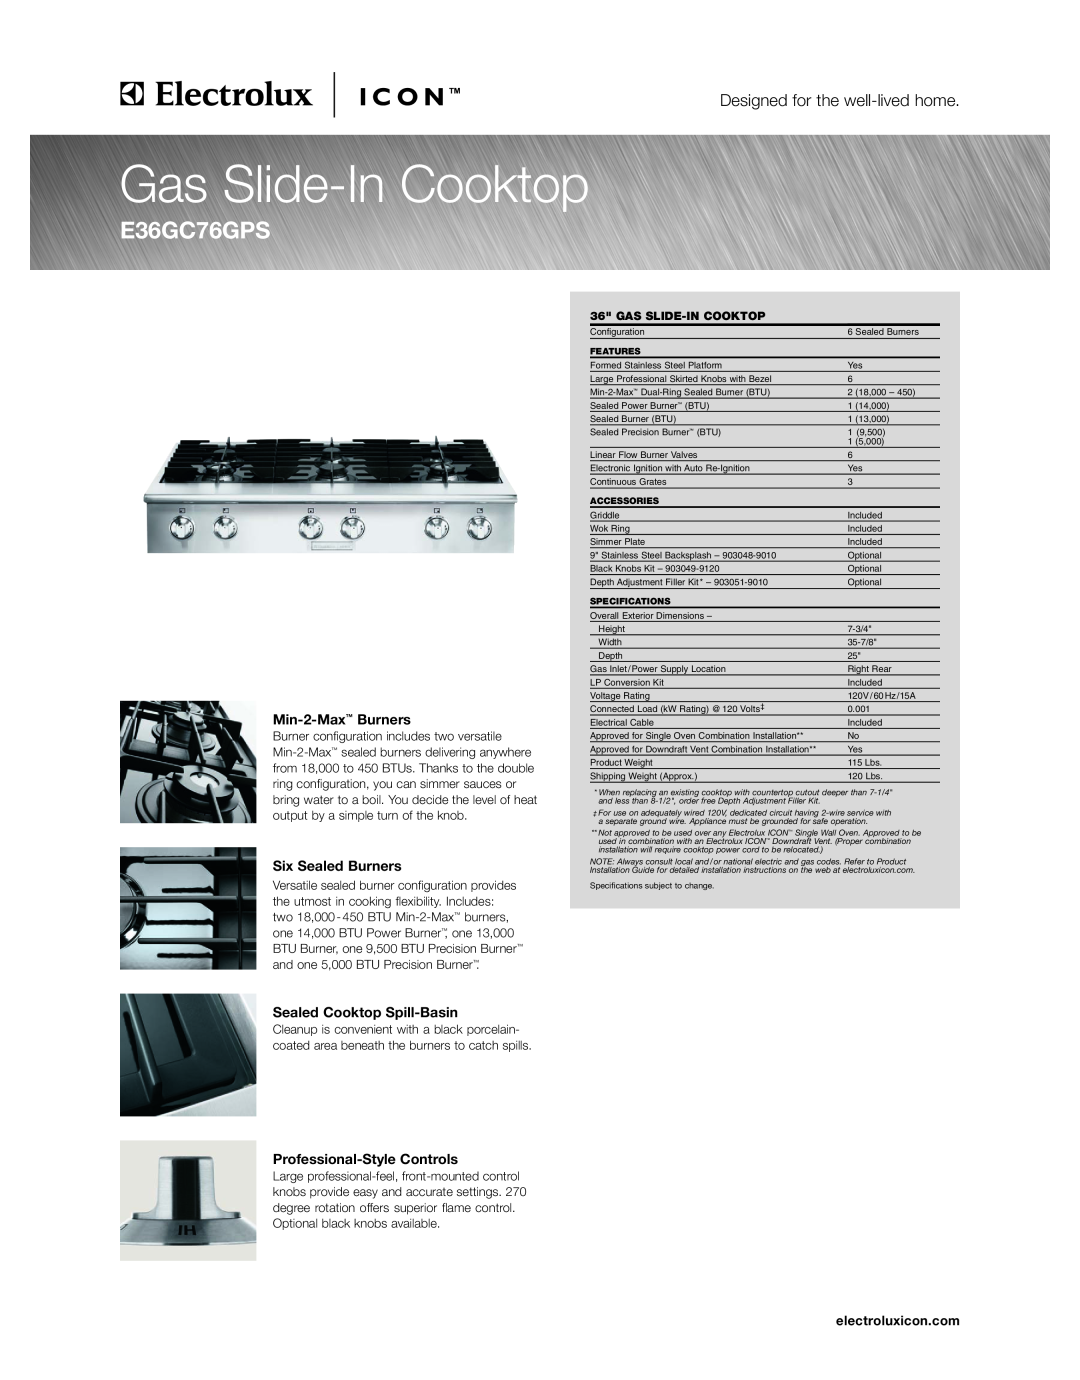 Electrolux E36GC76GPS specifications Gas Slide-In Cooktop, Designed for the well-lived home 